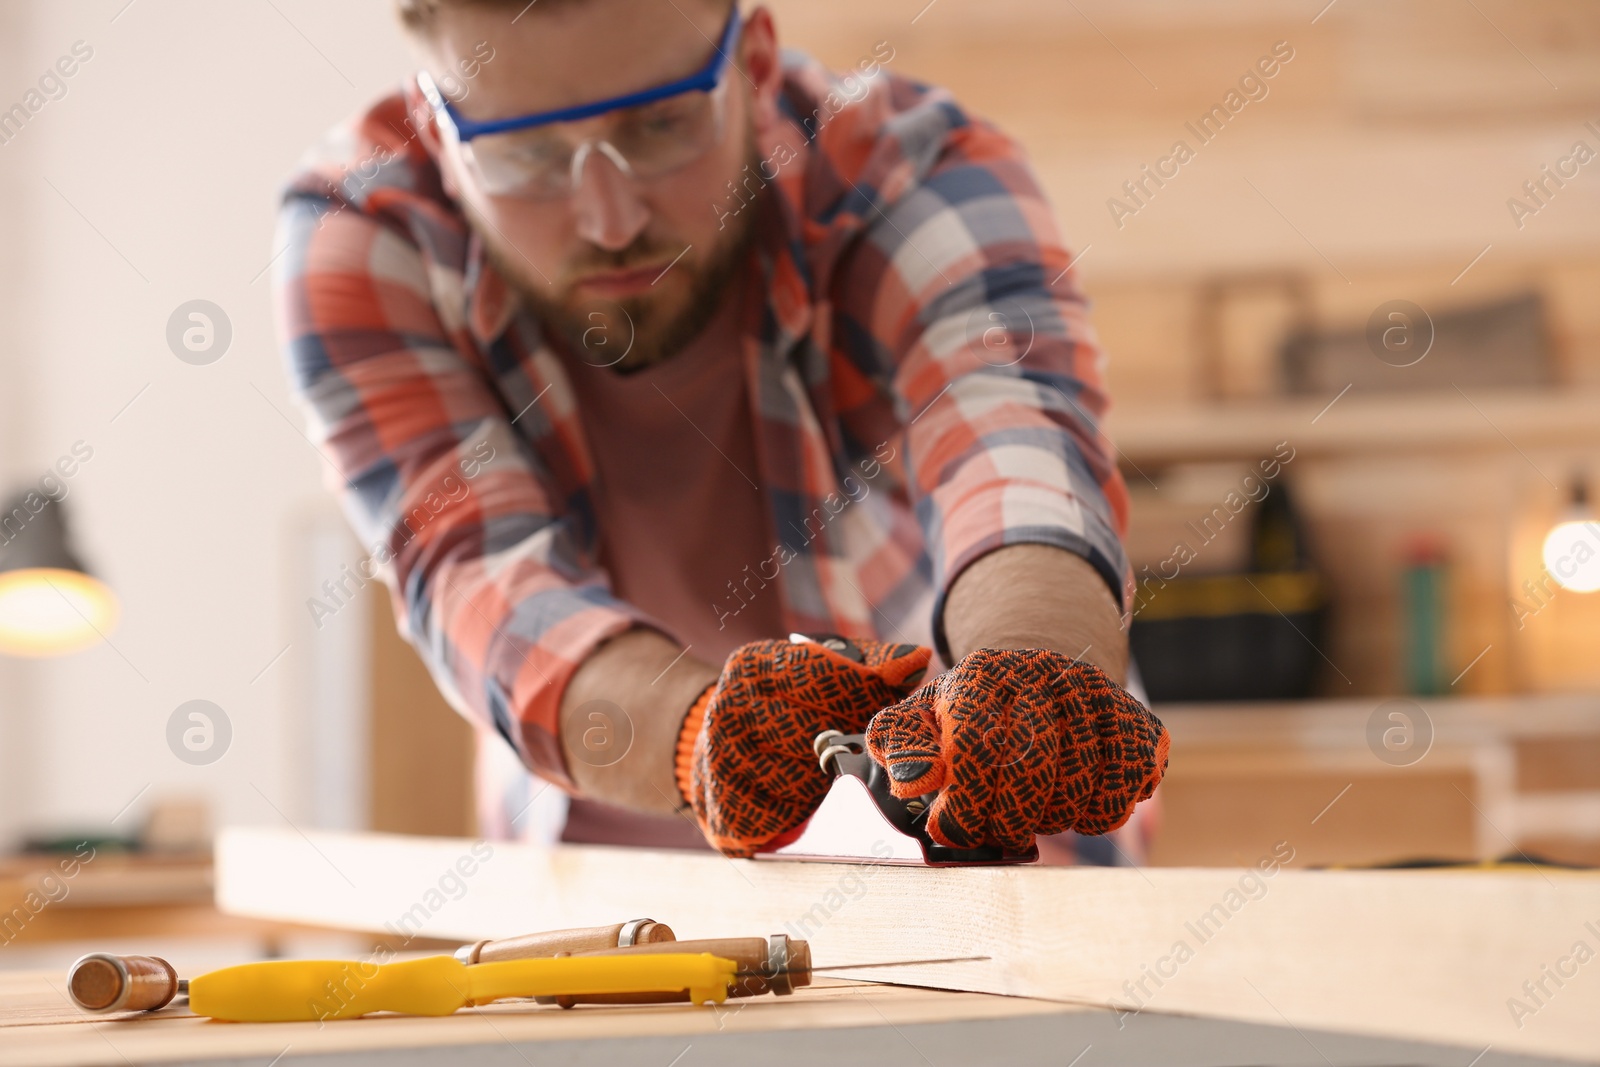 Photo of Carpenter shaping wooden bar with plane at table in workshop, focus on hands